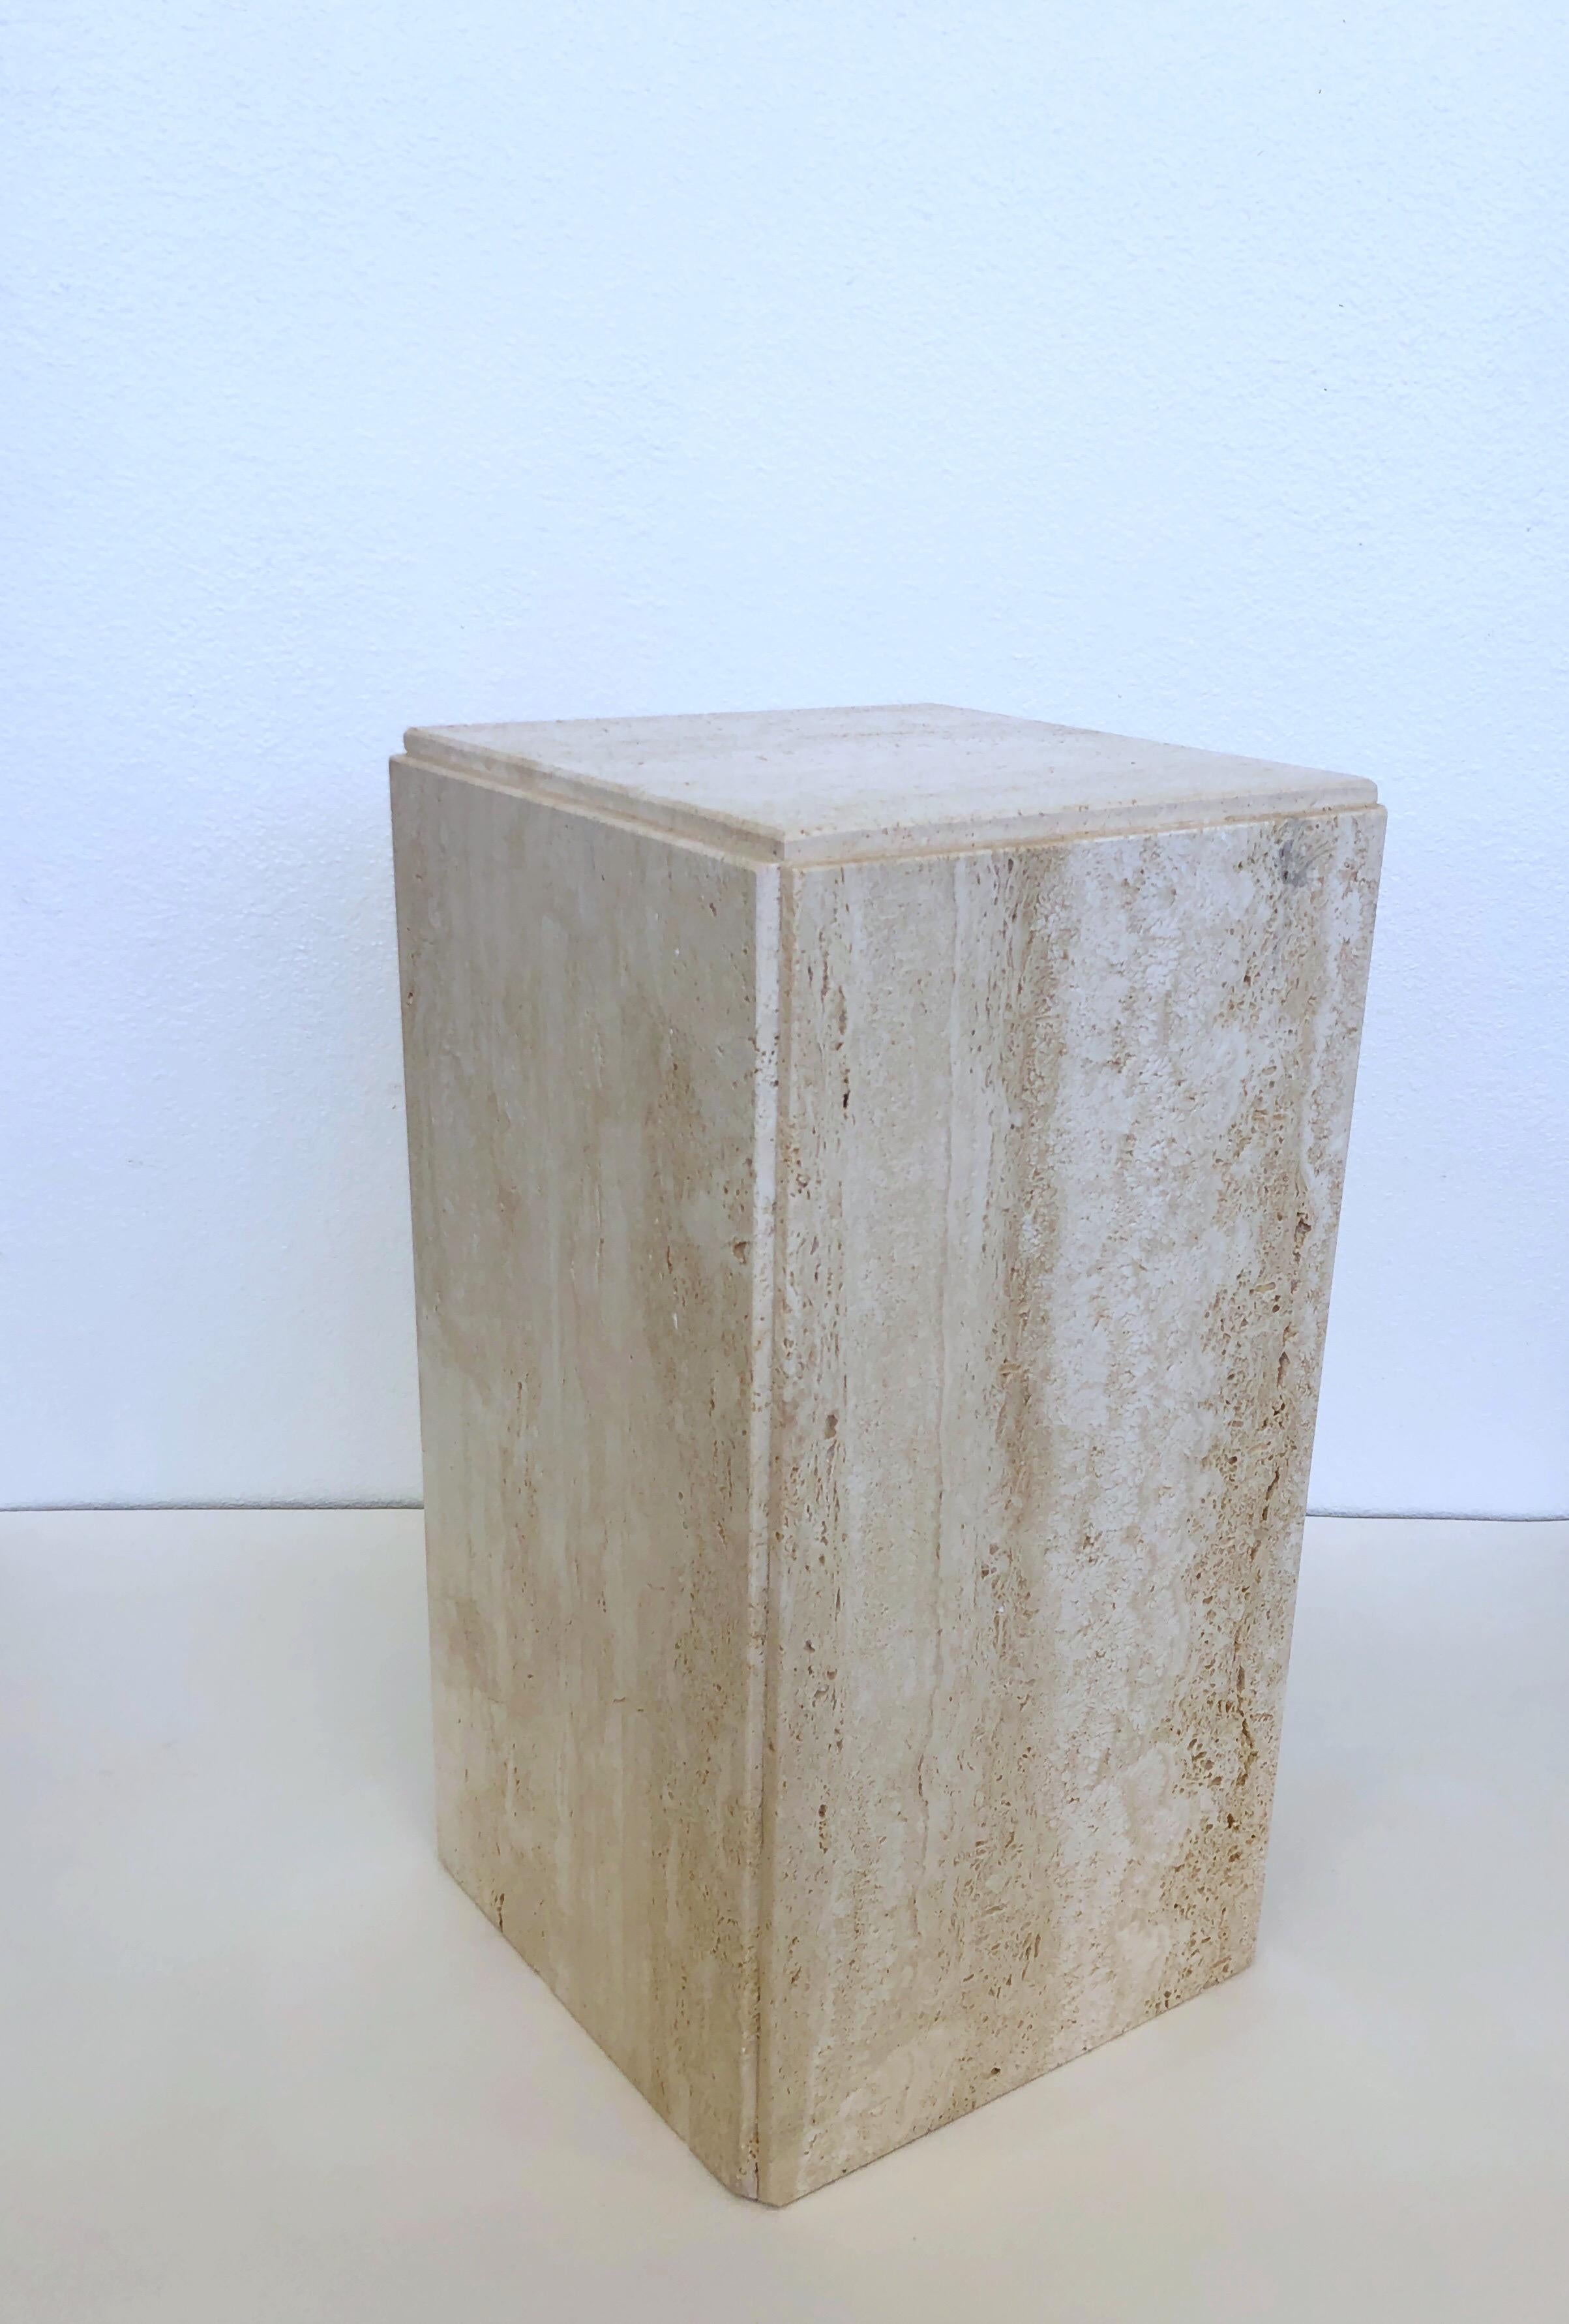 Small Italian travertine pedestal. 
In original condition, not polished. 
We do have a taller pedestal in a separate listing(see image 5). 
Measurements: 10.5” wide, 10.5” deep, 19.75” high.